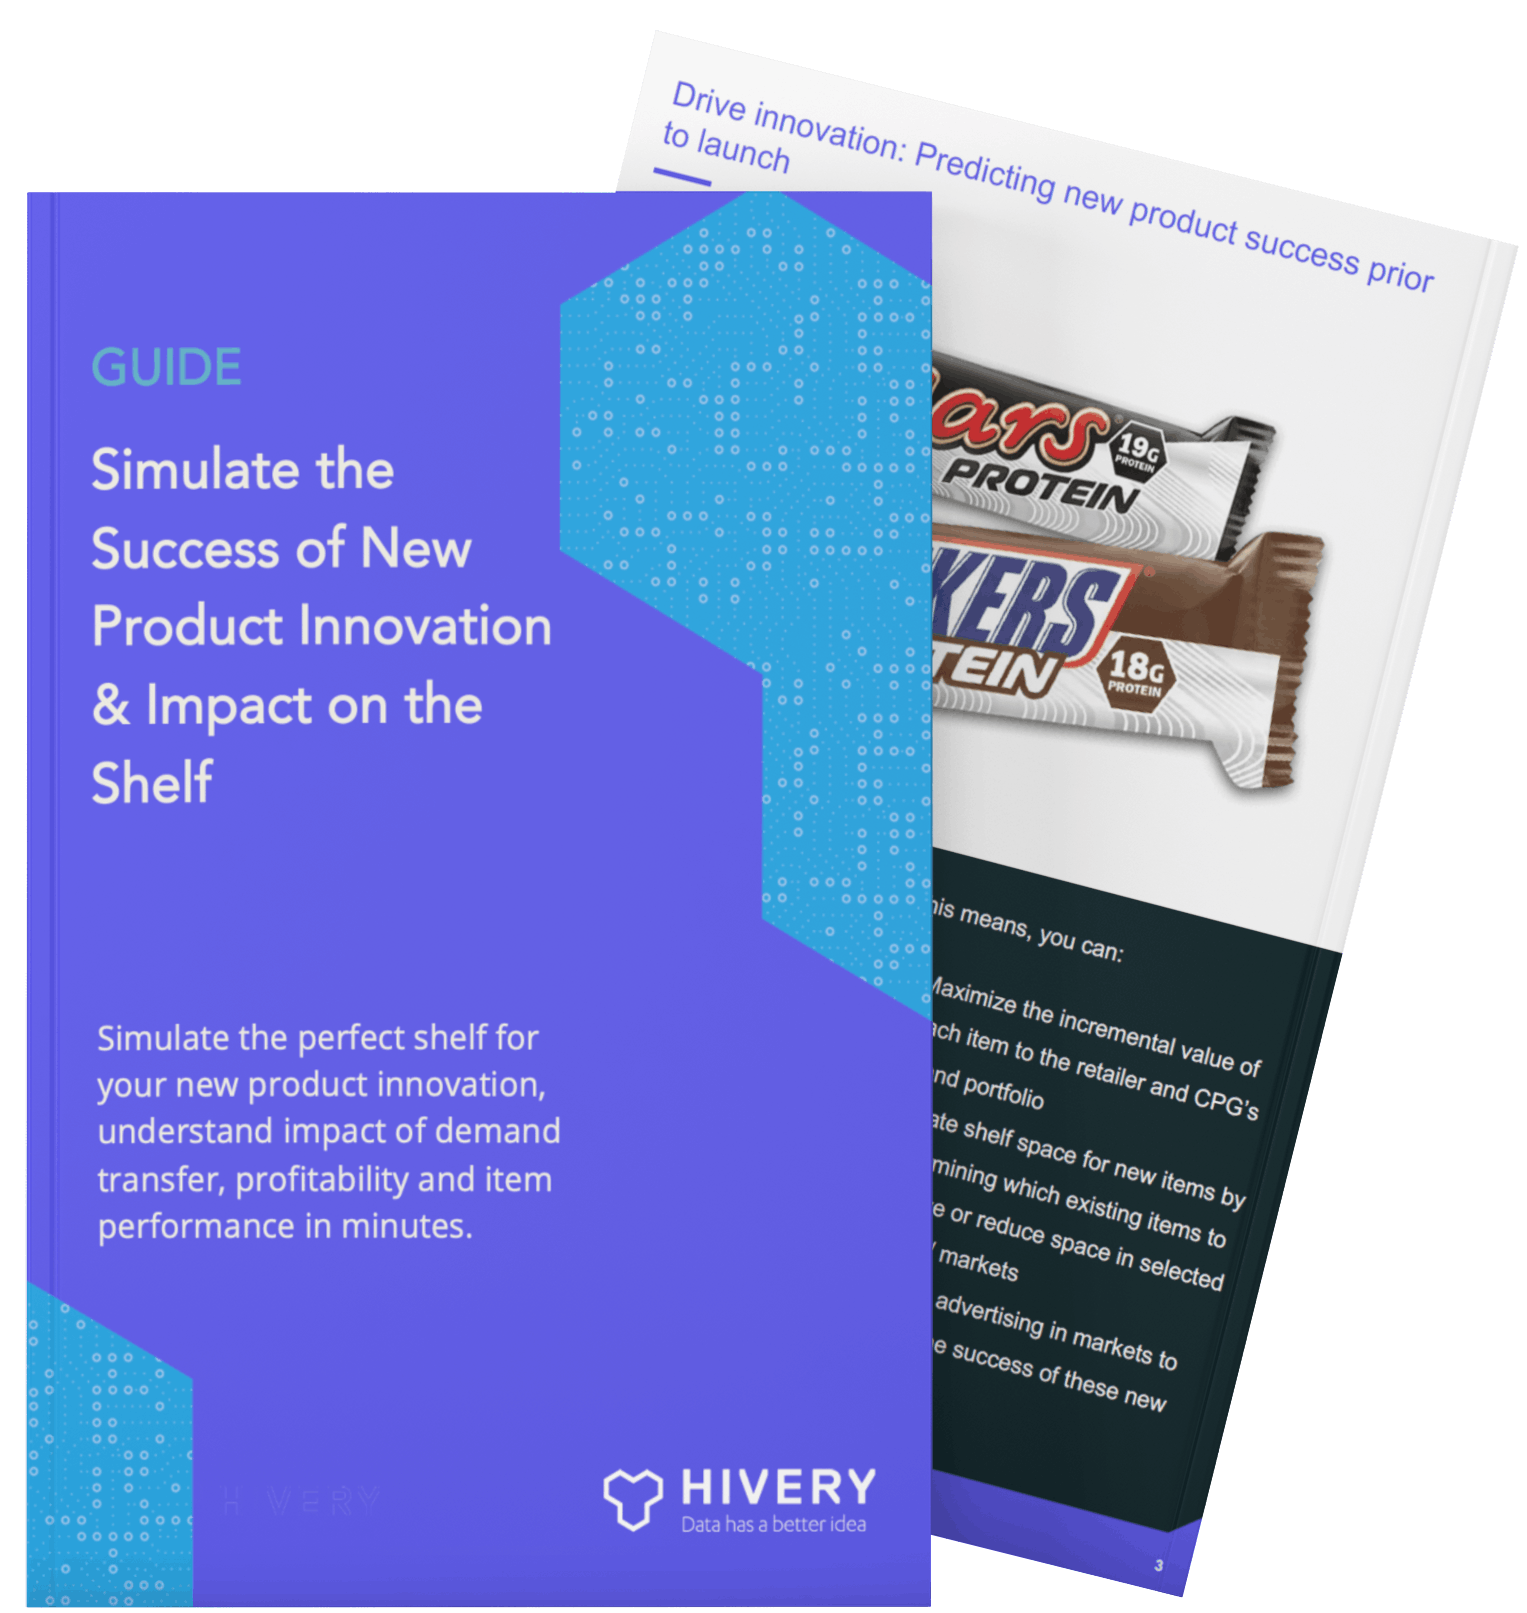 Guide - Simulate the Success of New Product Innovation & Impact on the Shelf